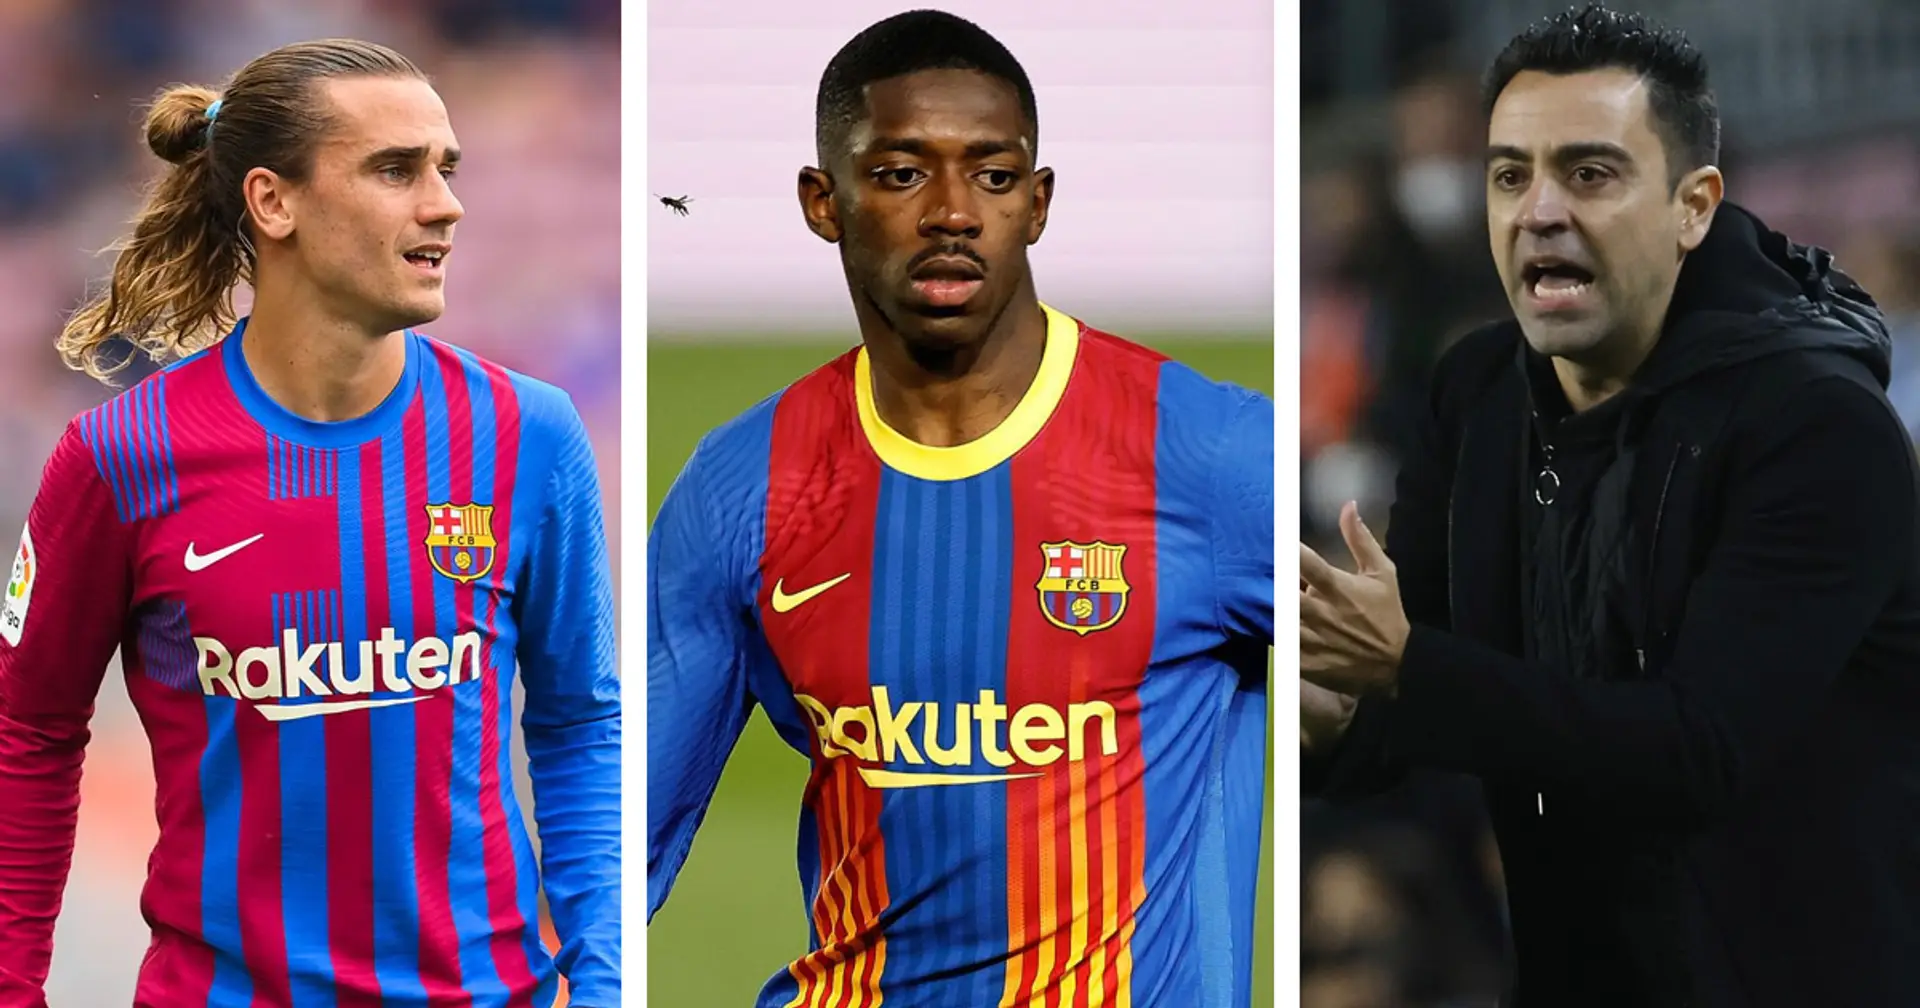 Barca director confirms Dembele wants to stay and 4 more big stories you might've missed